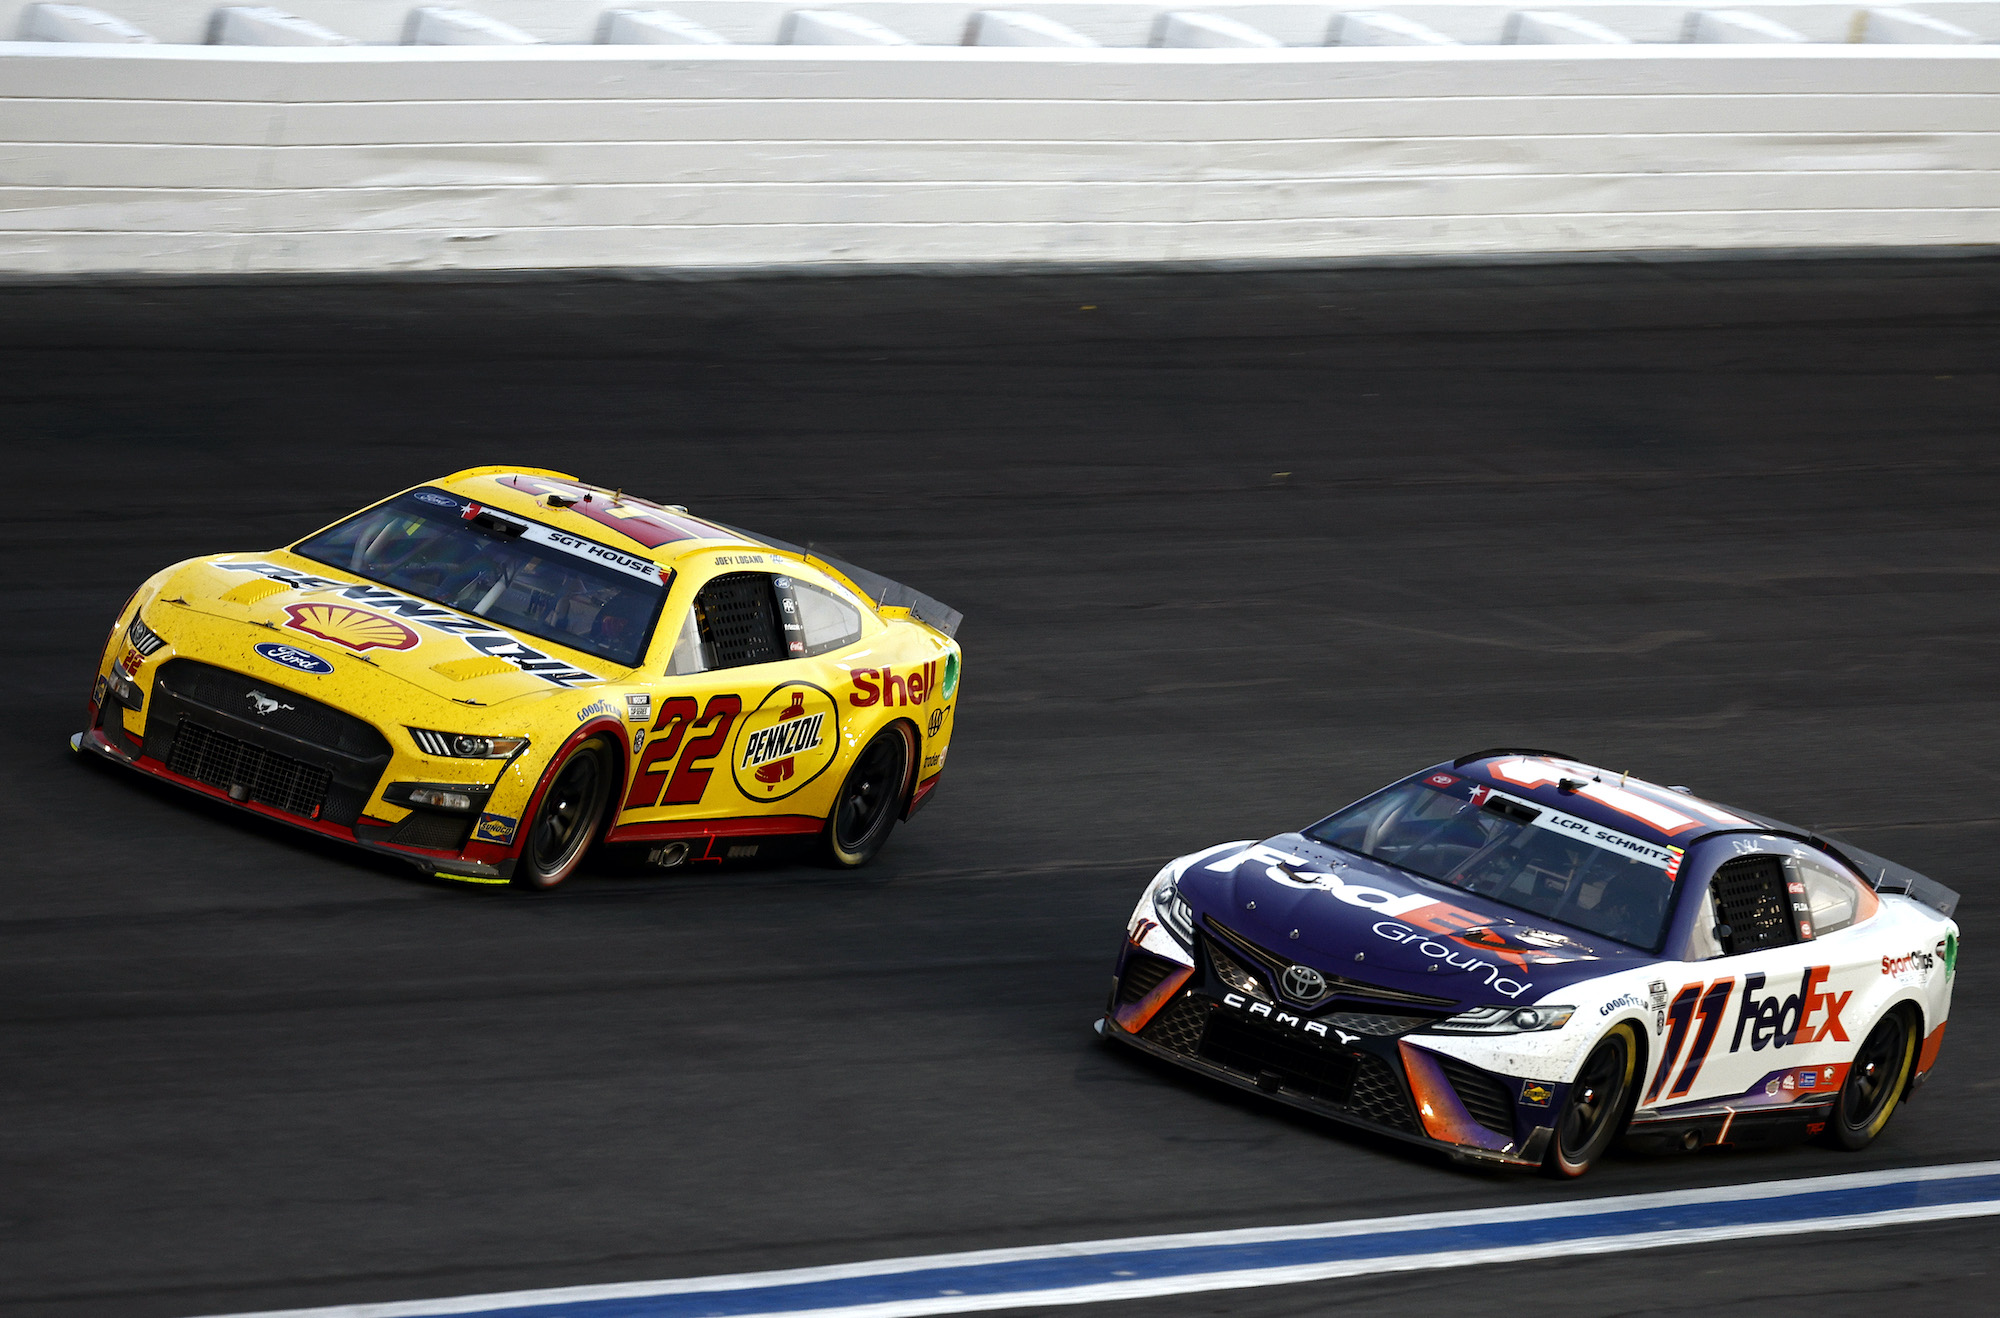 Denny Hamlin Apologizes After Joey Logano Called Out His ‘Dirty’ Move and Penske Pit Crew Member Referred to JGR Crew as ‘P*****’